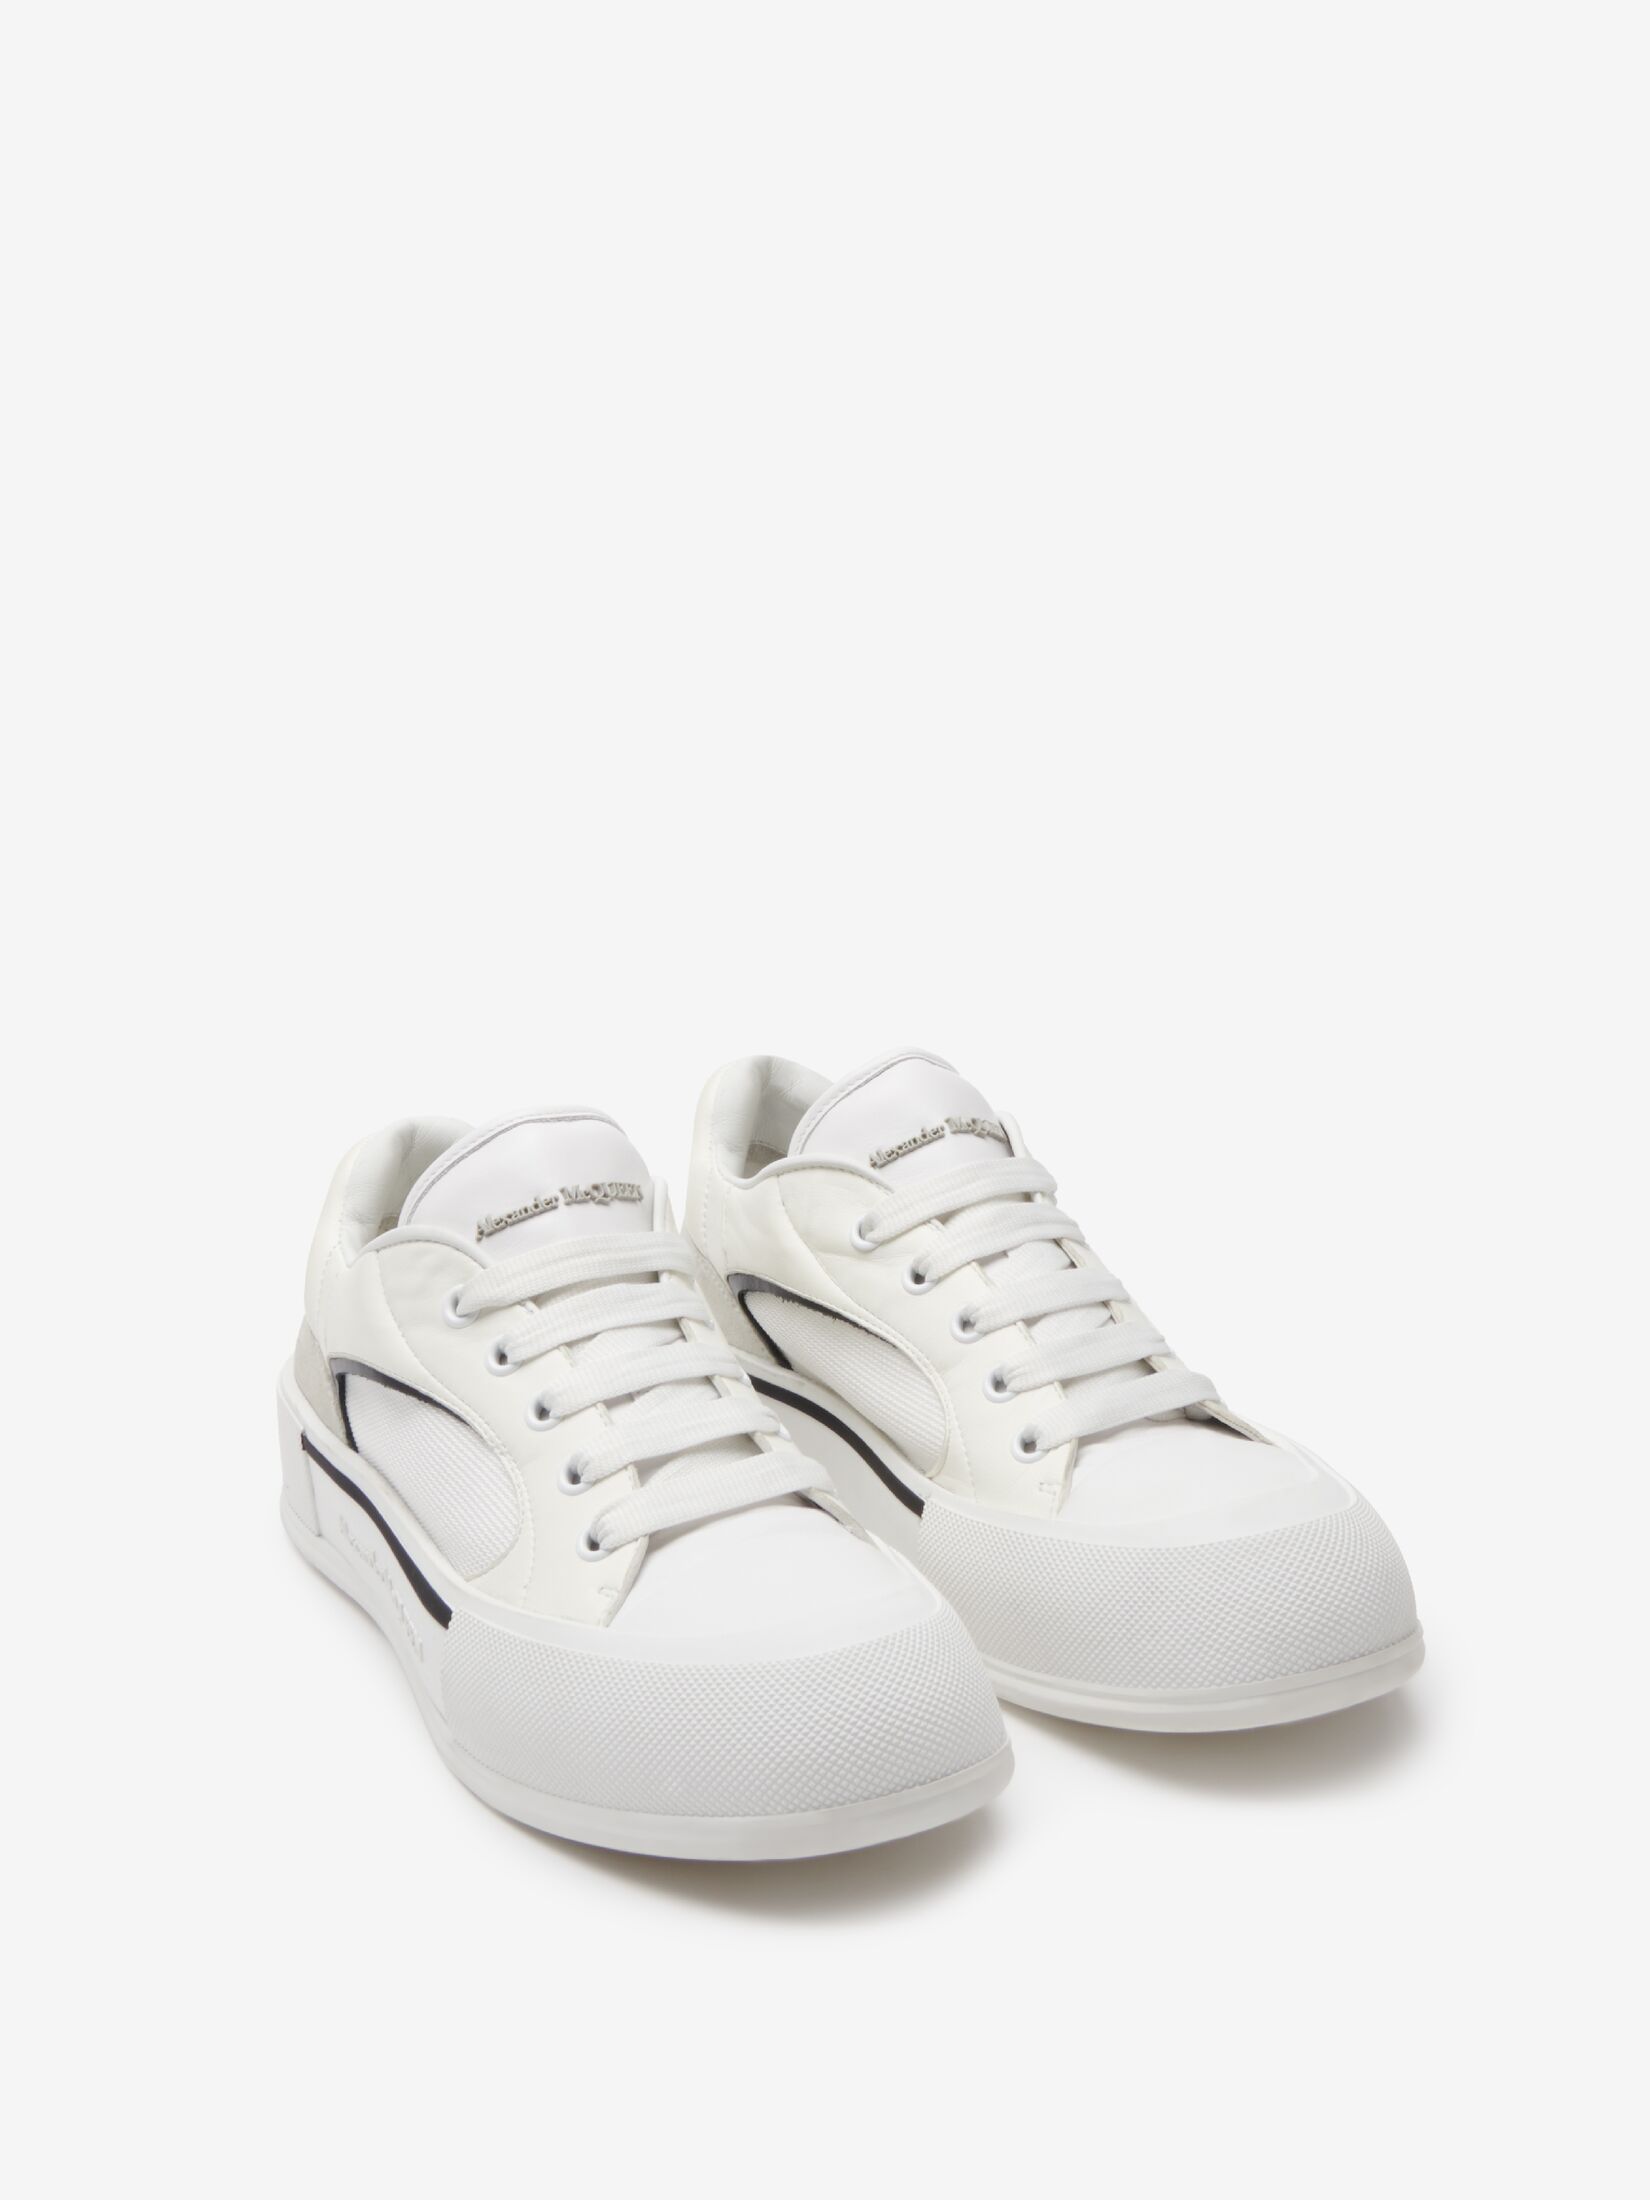 Alexander McQueen Sneaker with wide rubber sole white / black | Sneakers